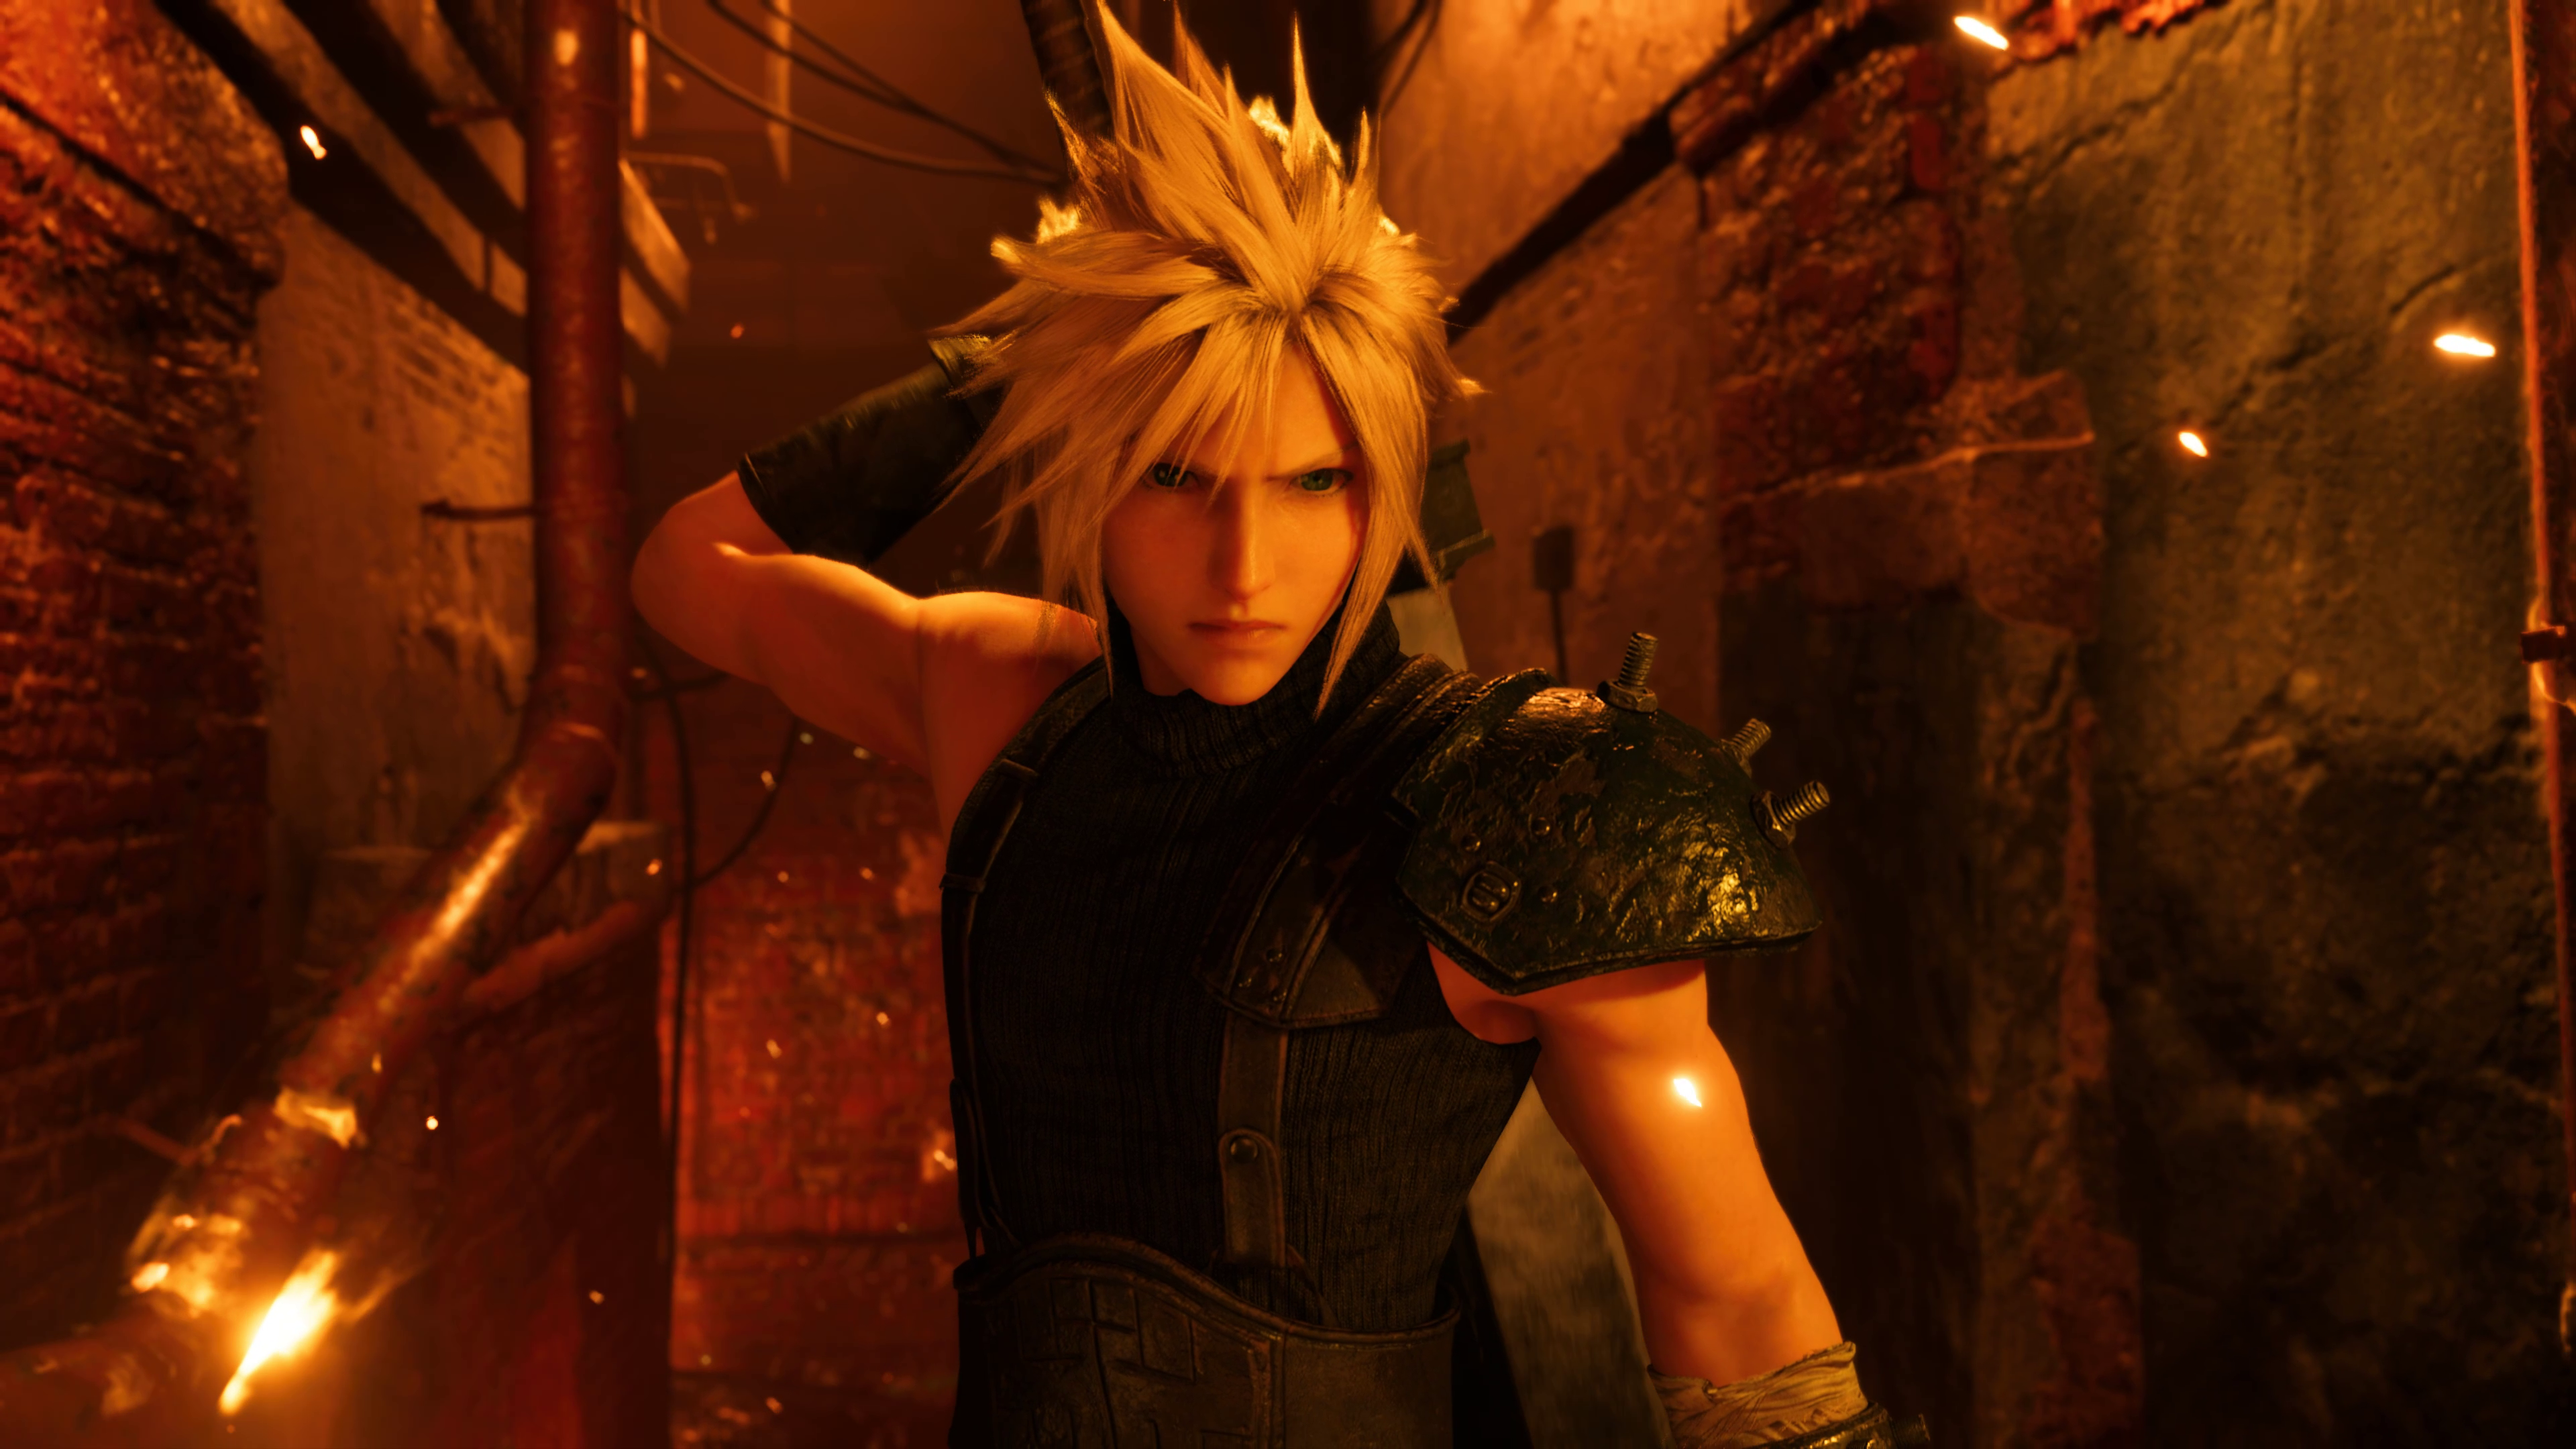 Image for Final Fantasy 7 Remake on PC is a basic, bare-bones port - but this game is irresistible on max settings